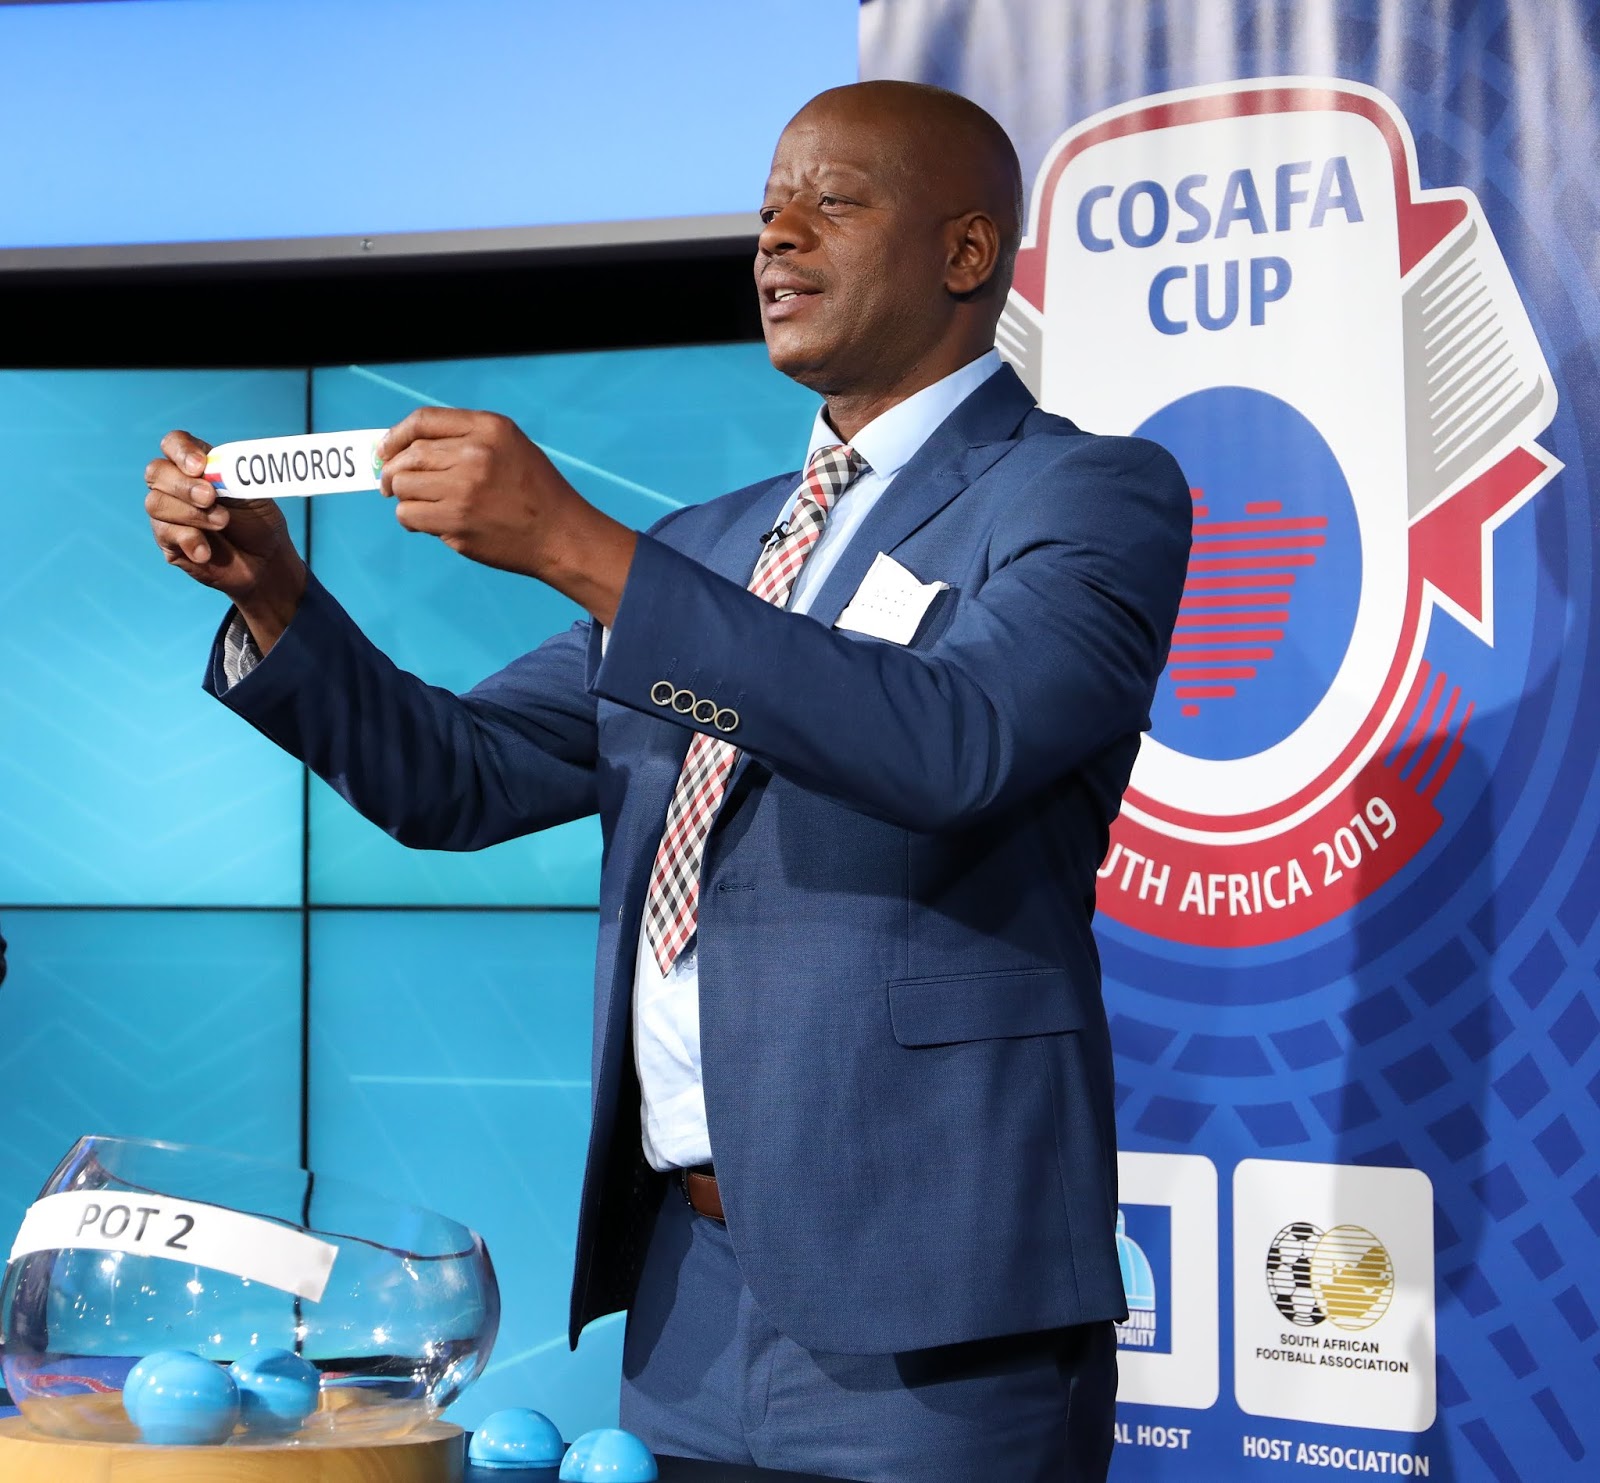 William Shongwe during the 2019 Cosafa Cup Draw at the SuperSport Studios, Johannesburg on the 02 May 2019 ©Muzi Ntombela/BackpagePix